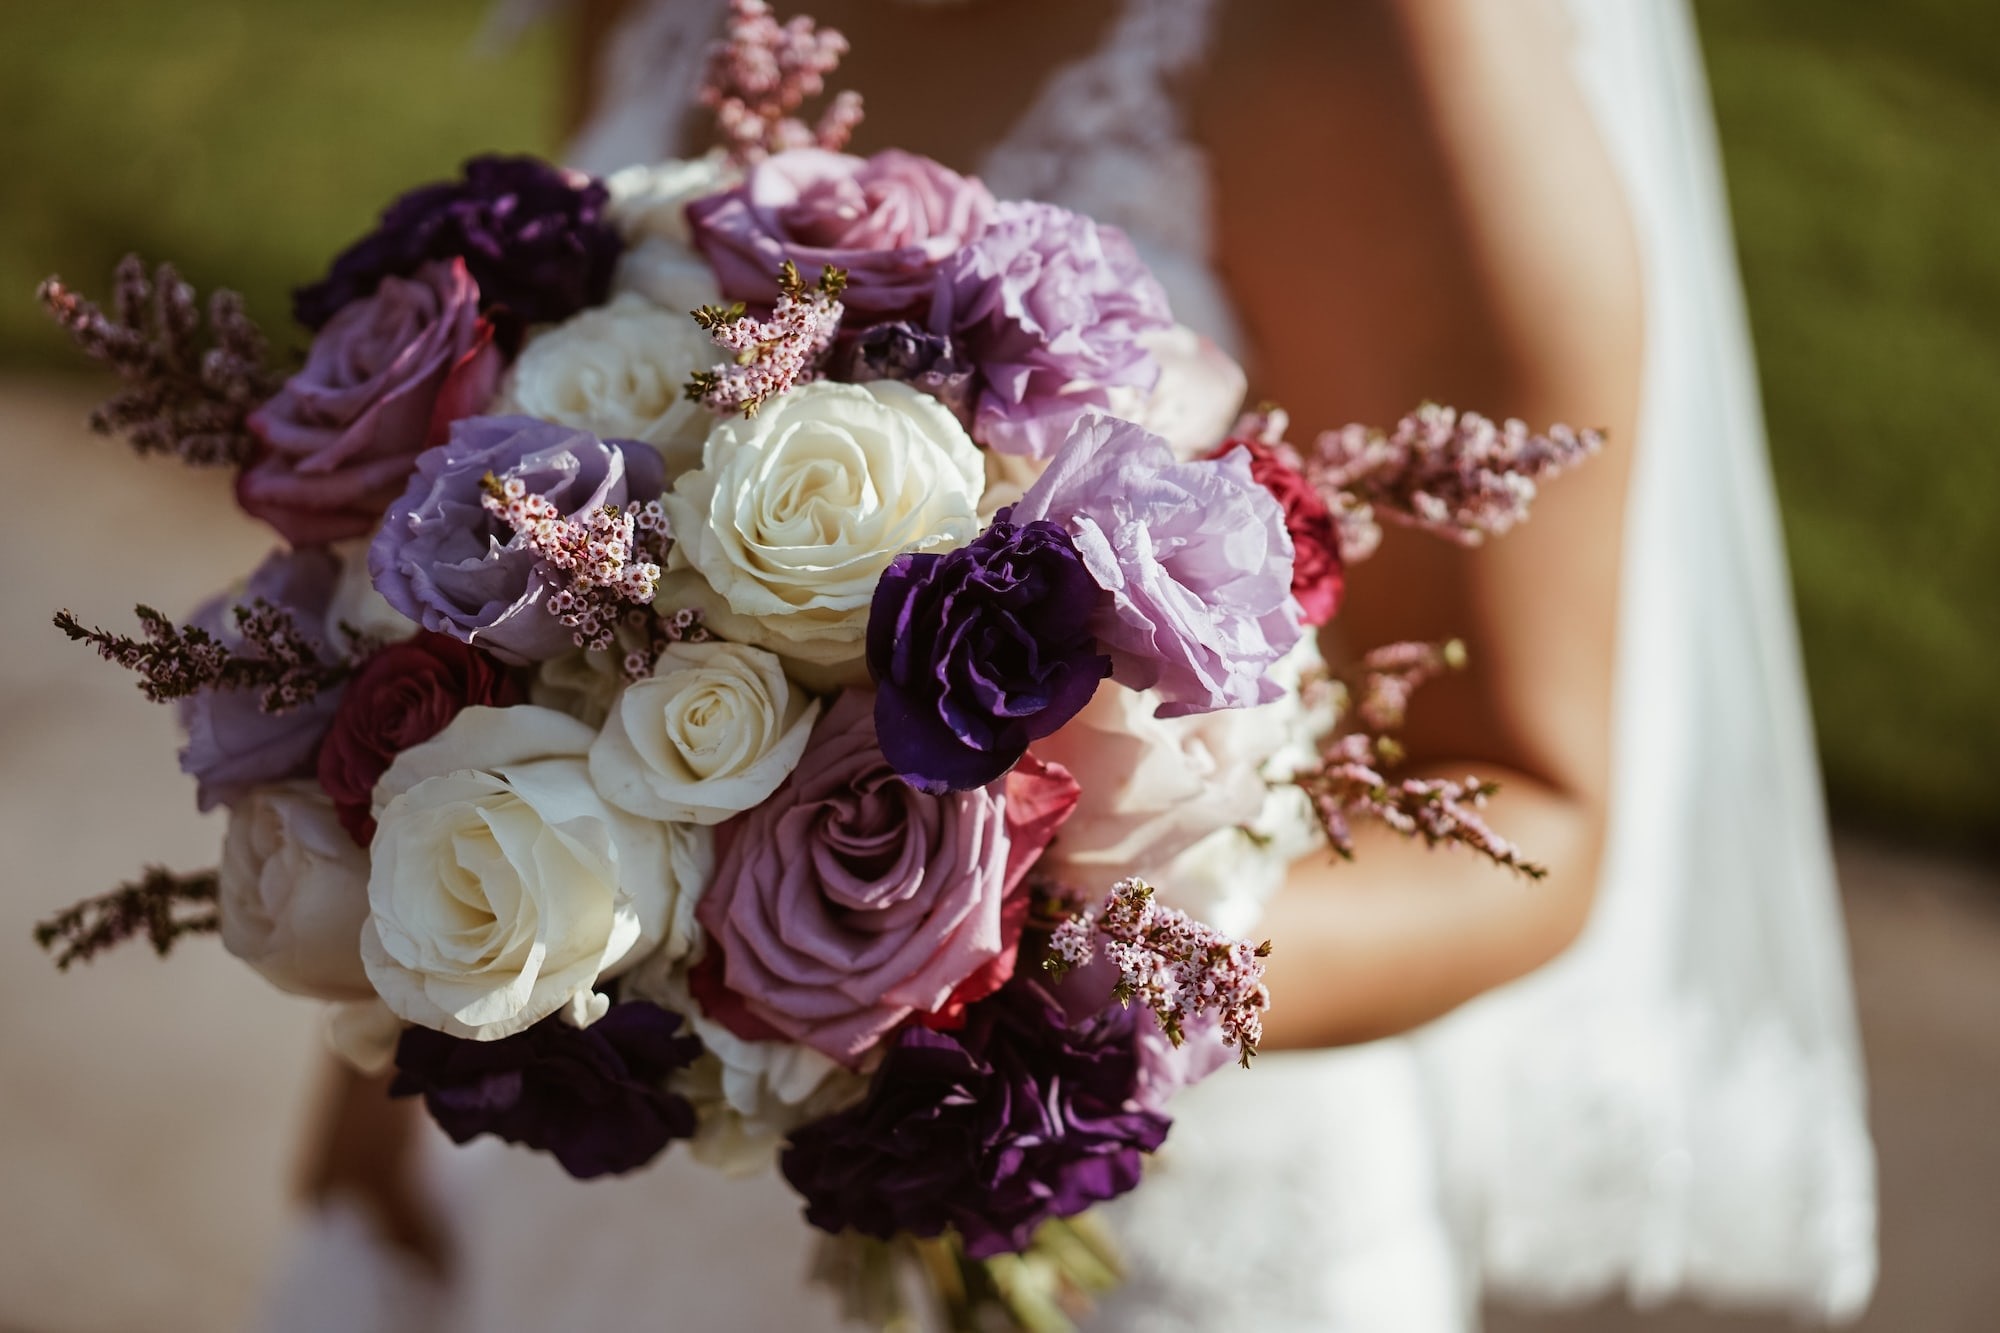 As the Bride walks up the aisle at her Wedding Ceremony, the Bride stops and hands her mother a flower from her bouquet and they embrace. After the Wedding Cere